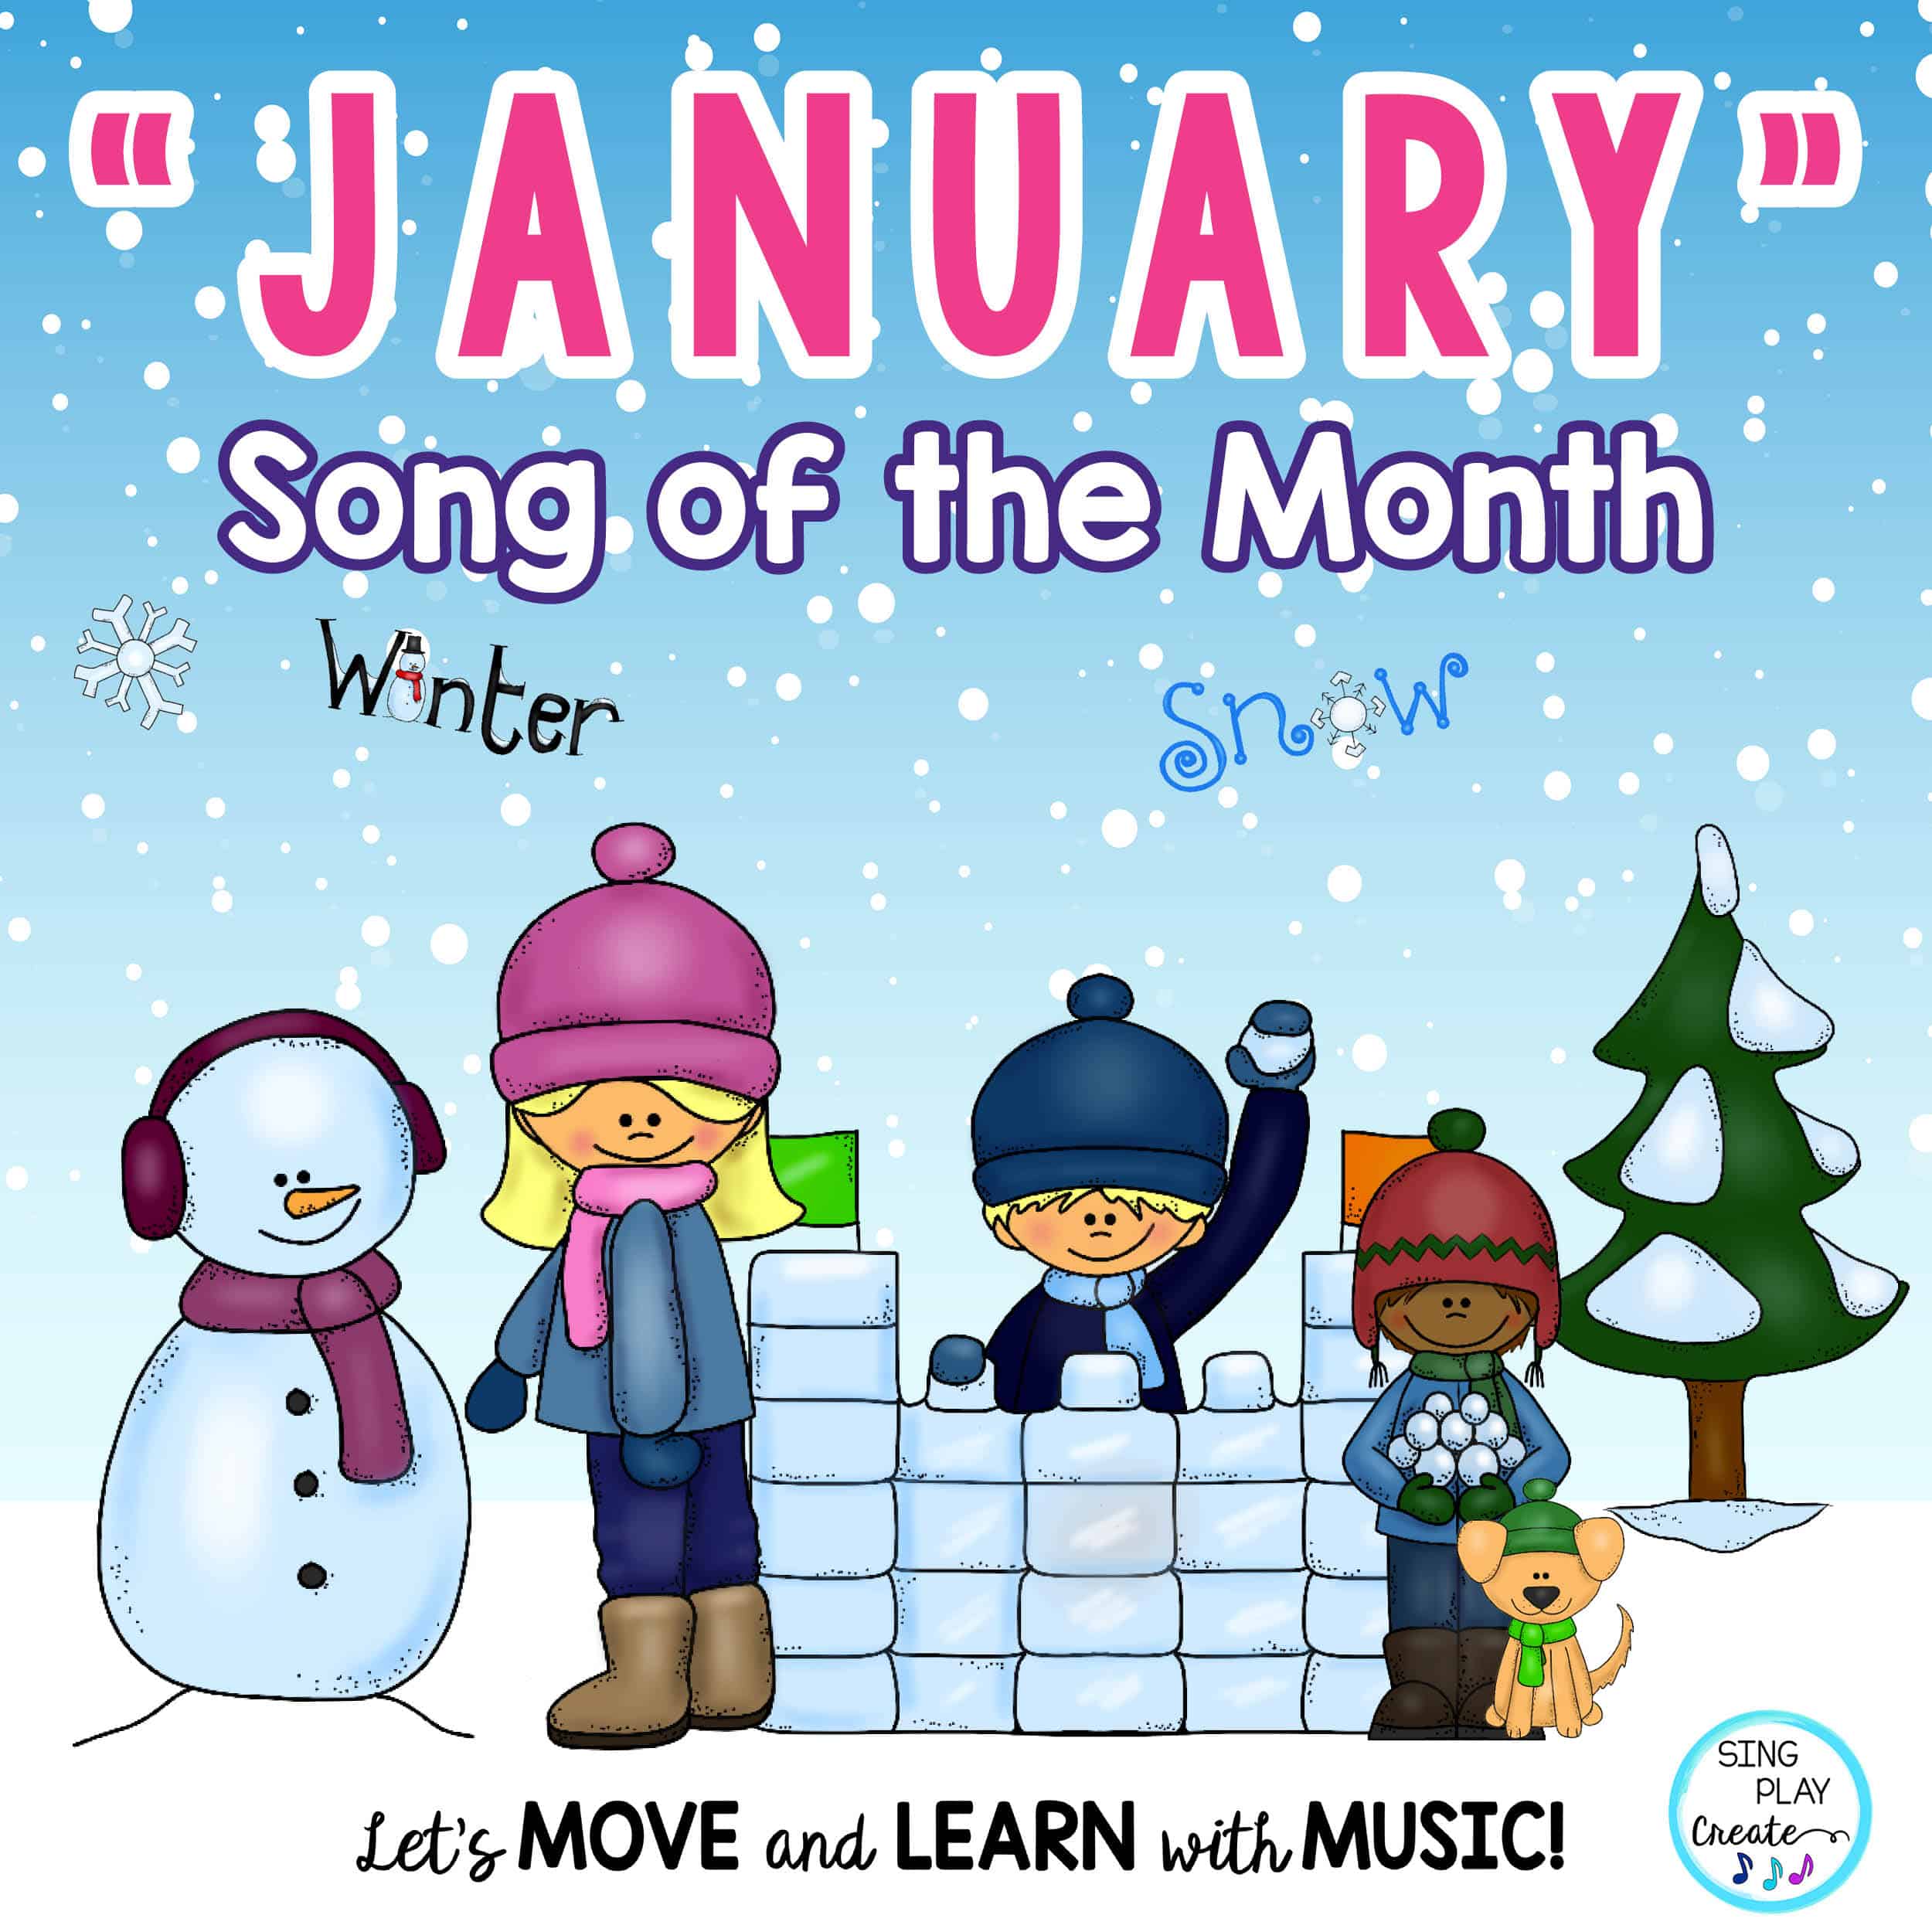 January Winter Action Song: Poem And Song of the Month - Sing Play Create